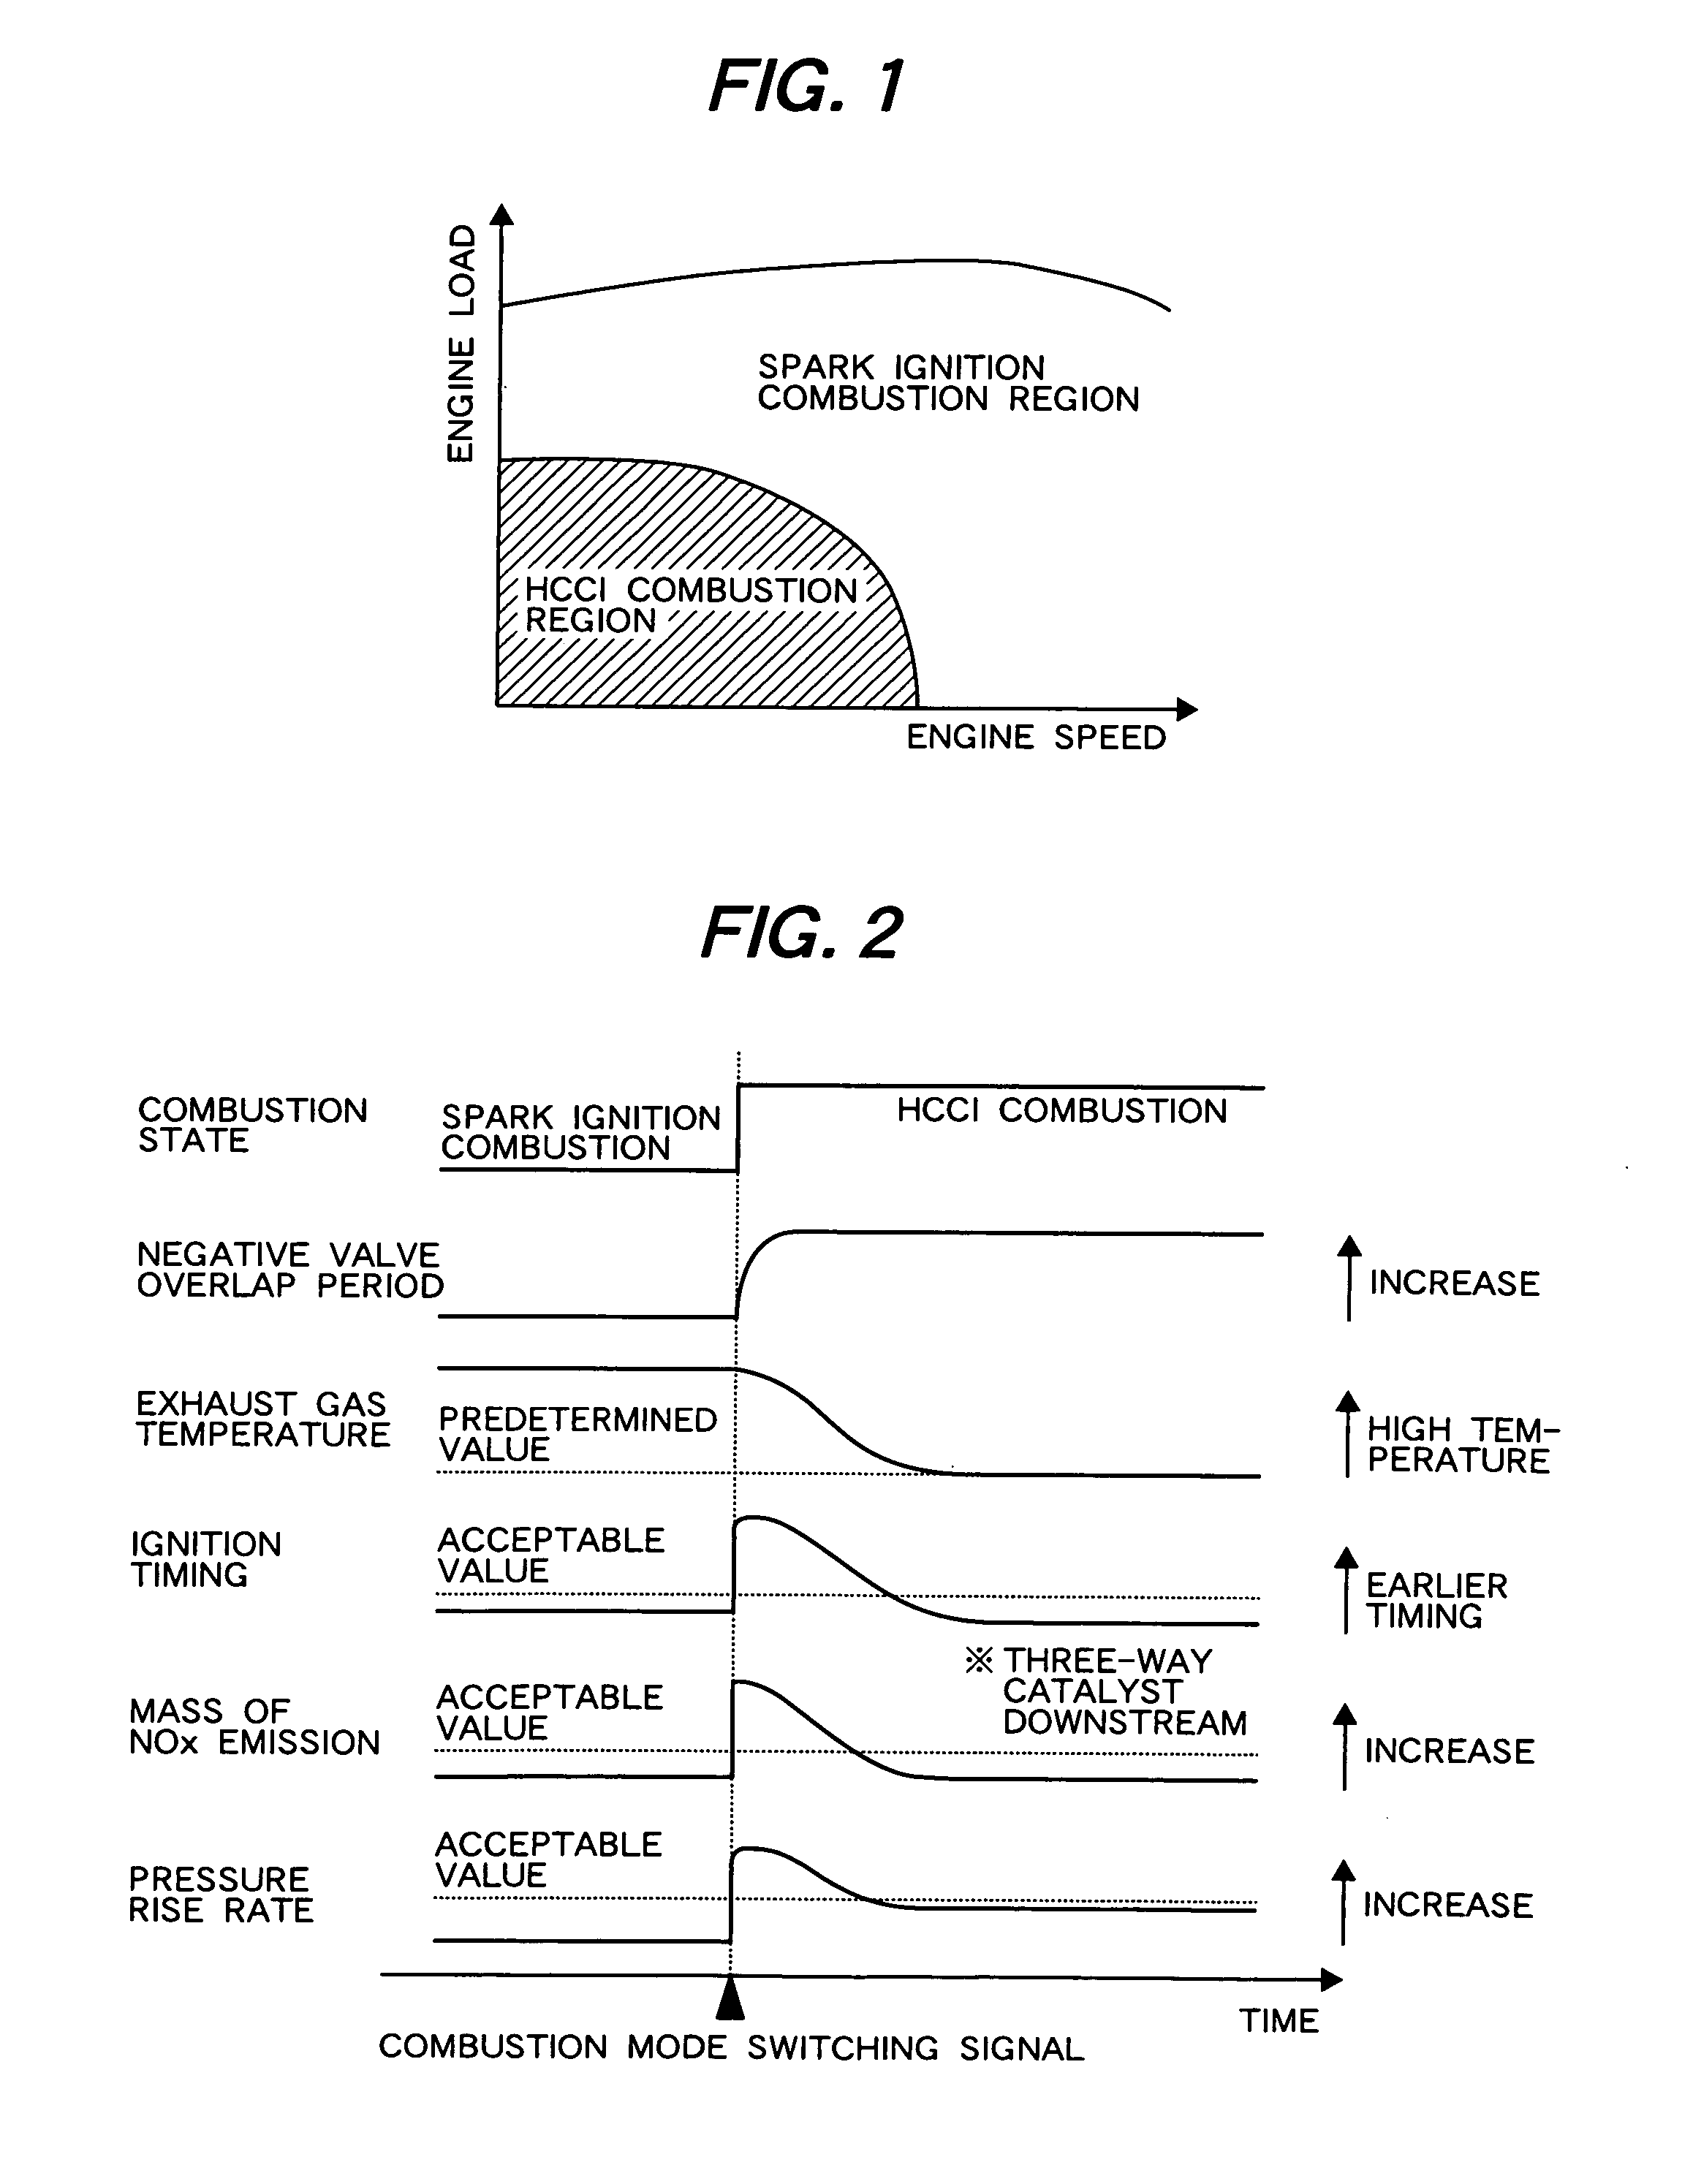 Controller for compression ignition engine